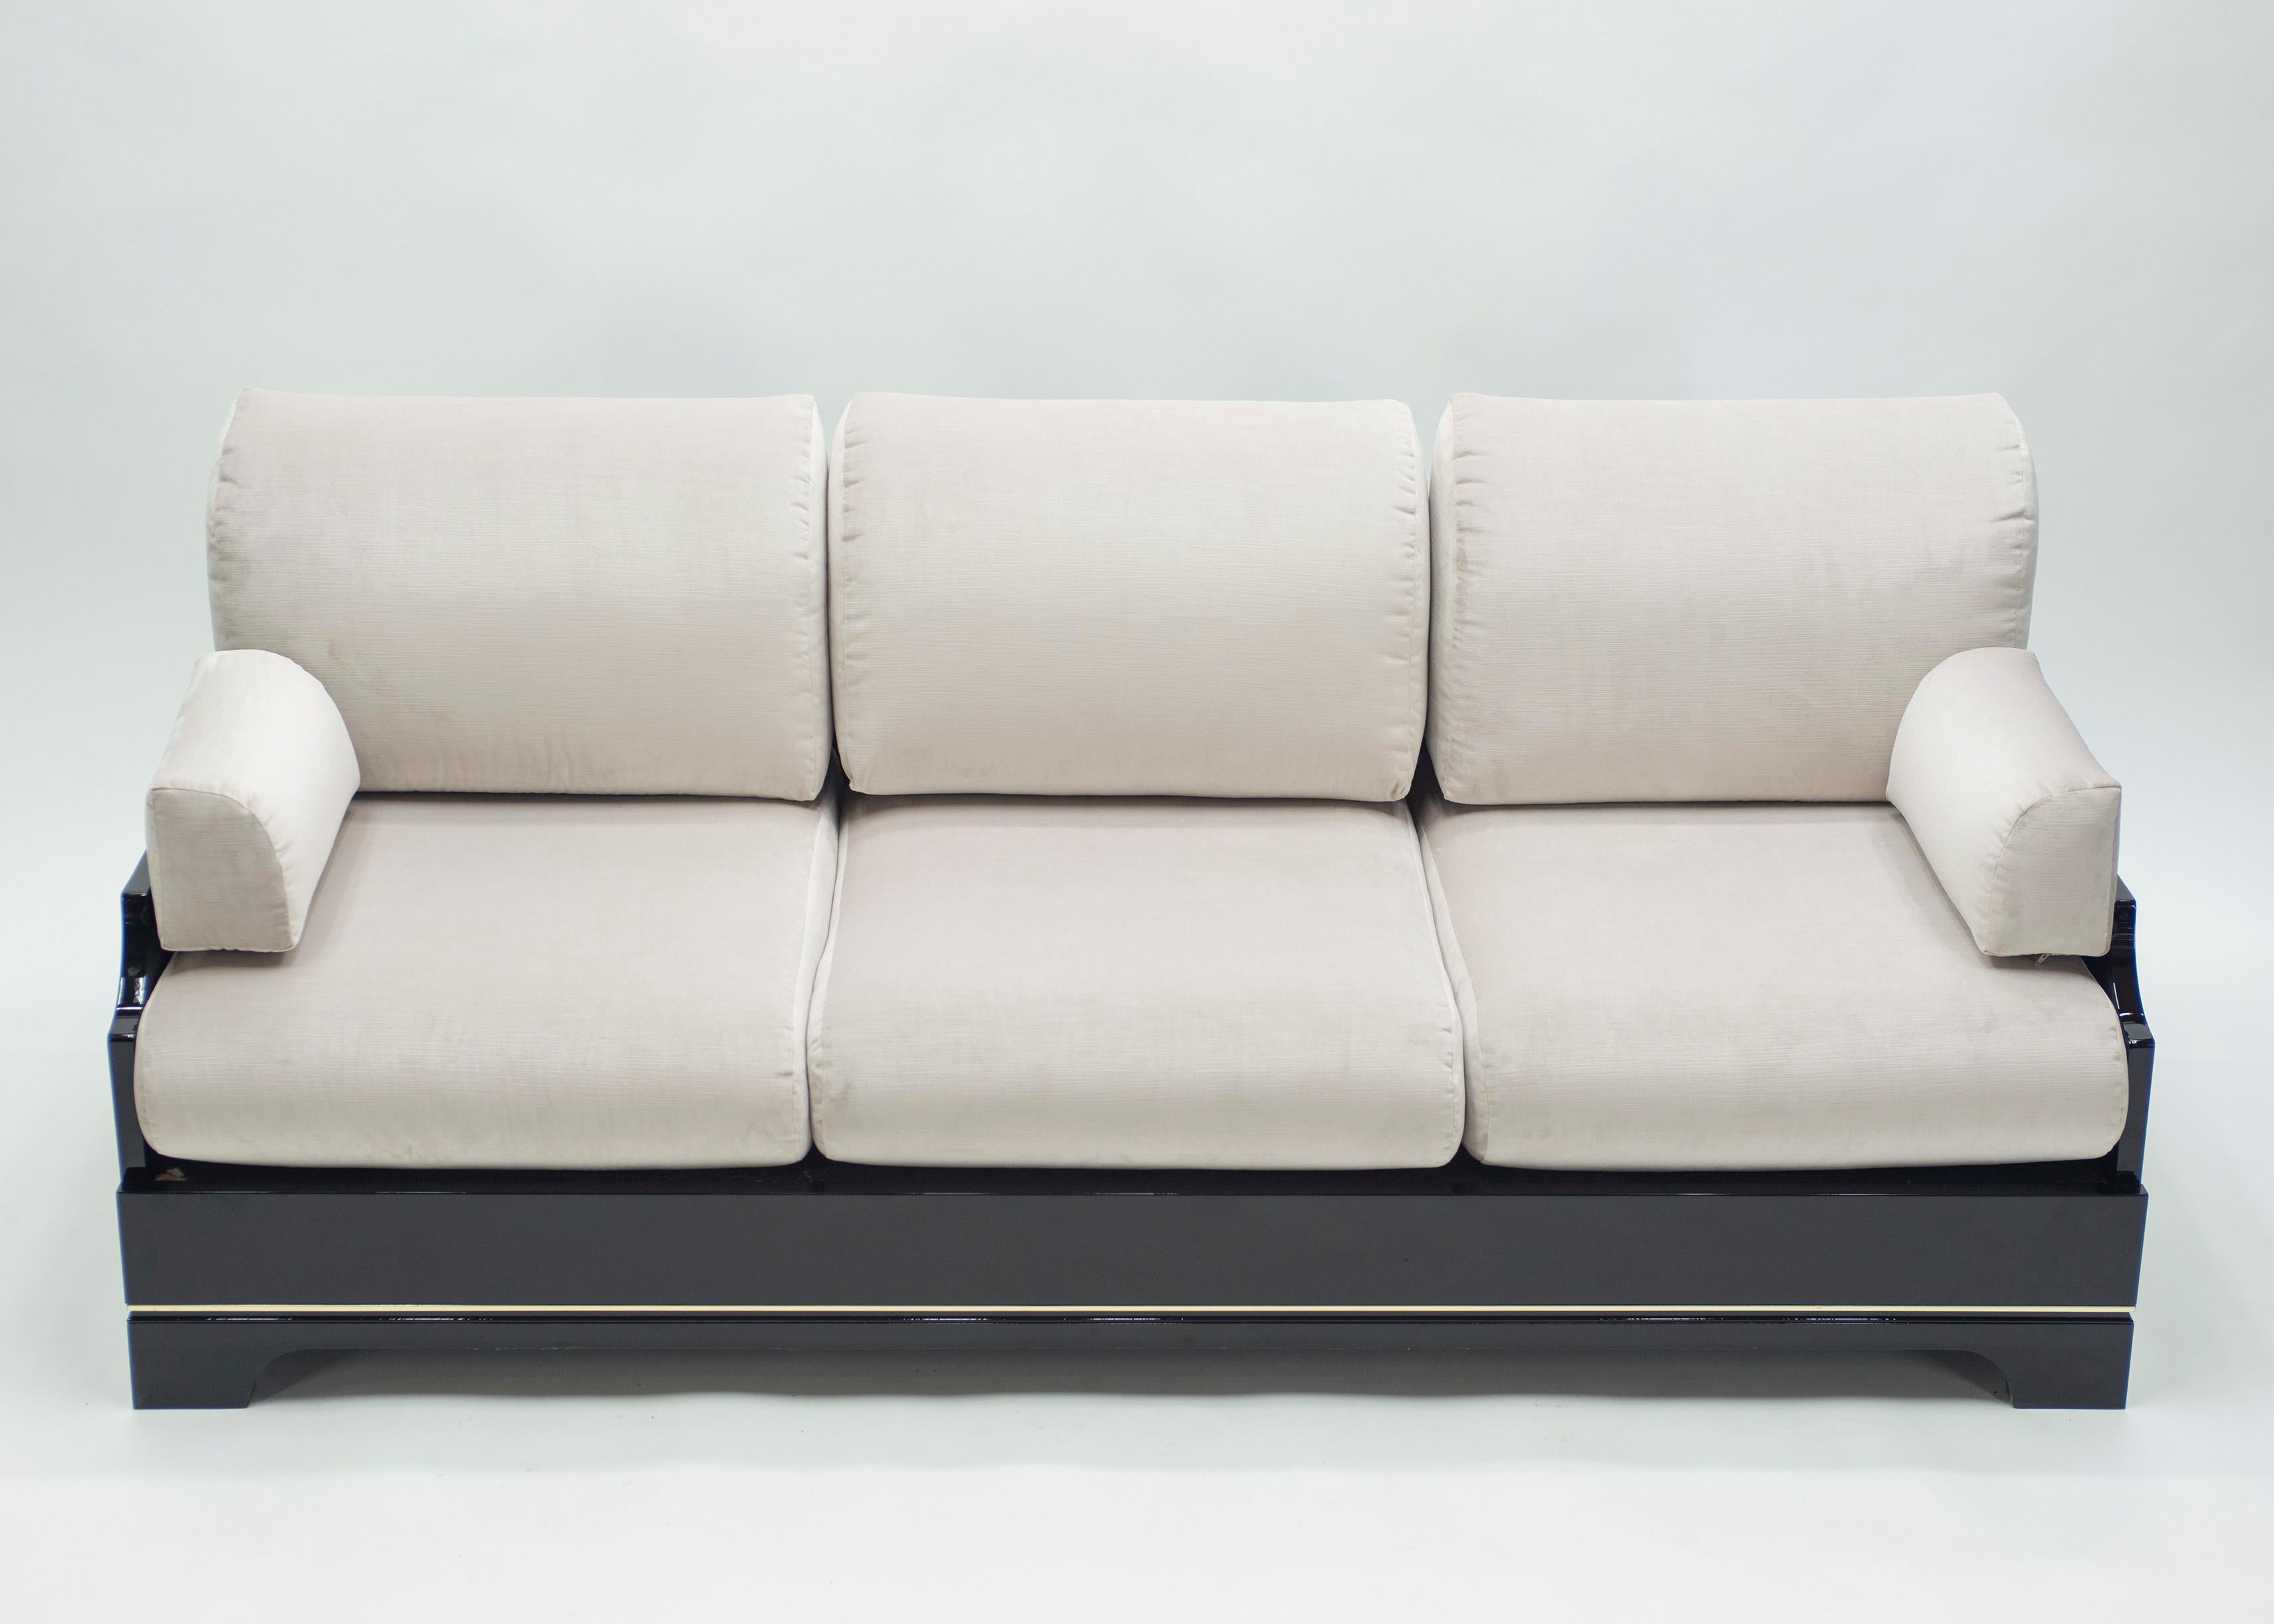 This sofa from the Mid-Century Modern Italian Riviera period designed by Romeo Rega is bursting with nostalgia. With its impeccable design, perfect proportions, and high-end Italian black lacquer and brass materials, it was likely a hugely expensive